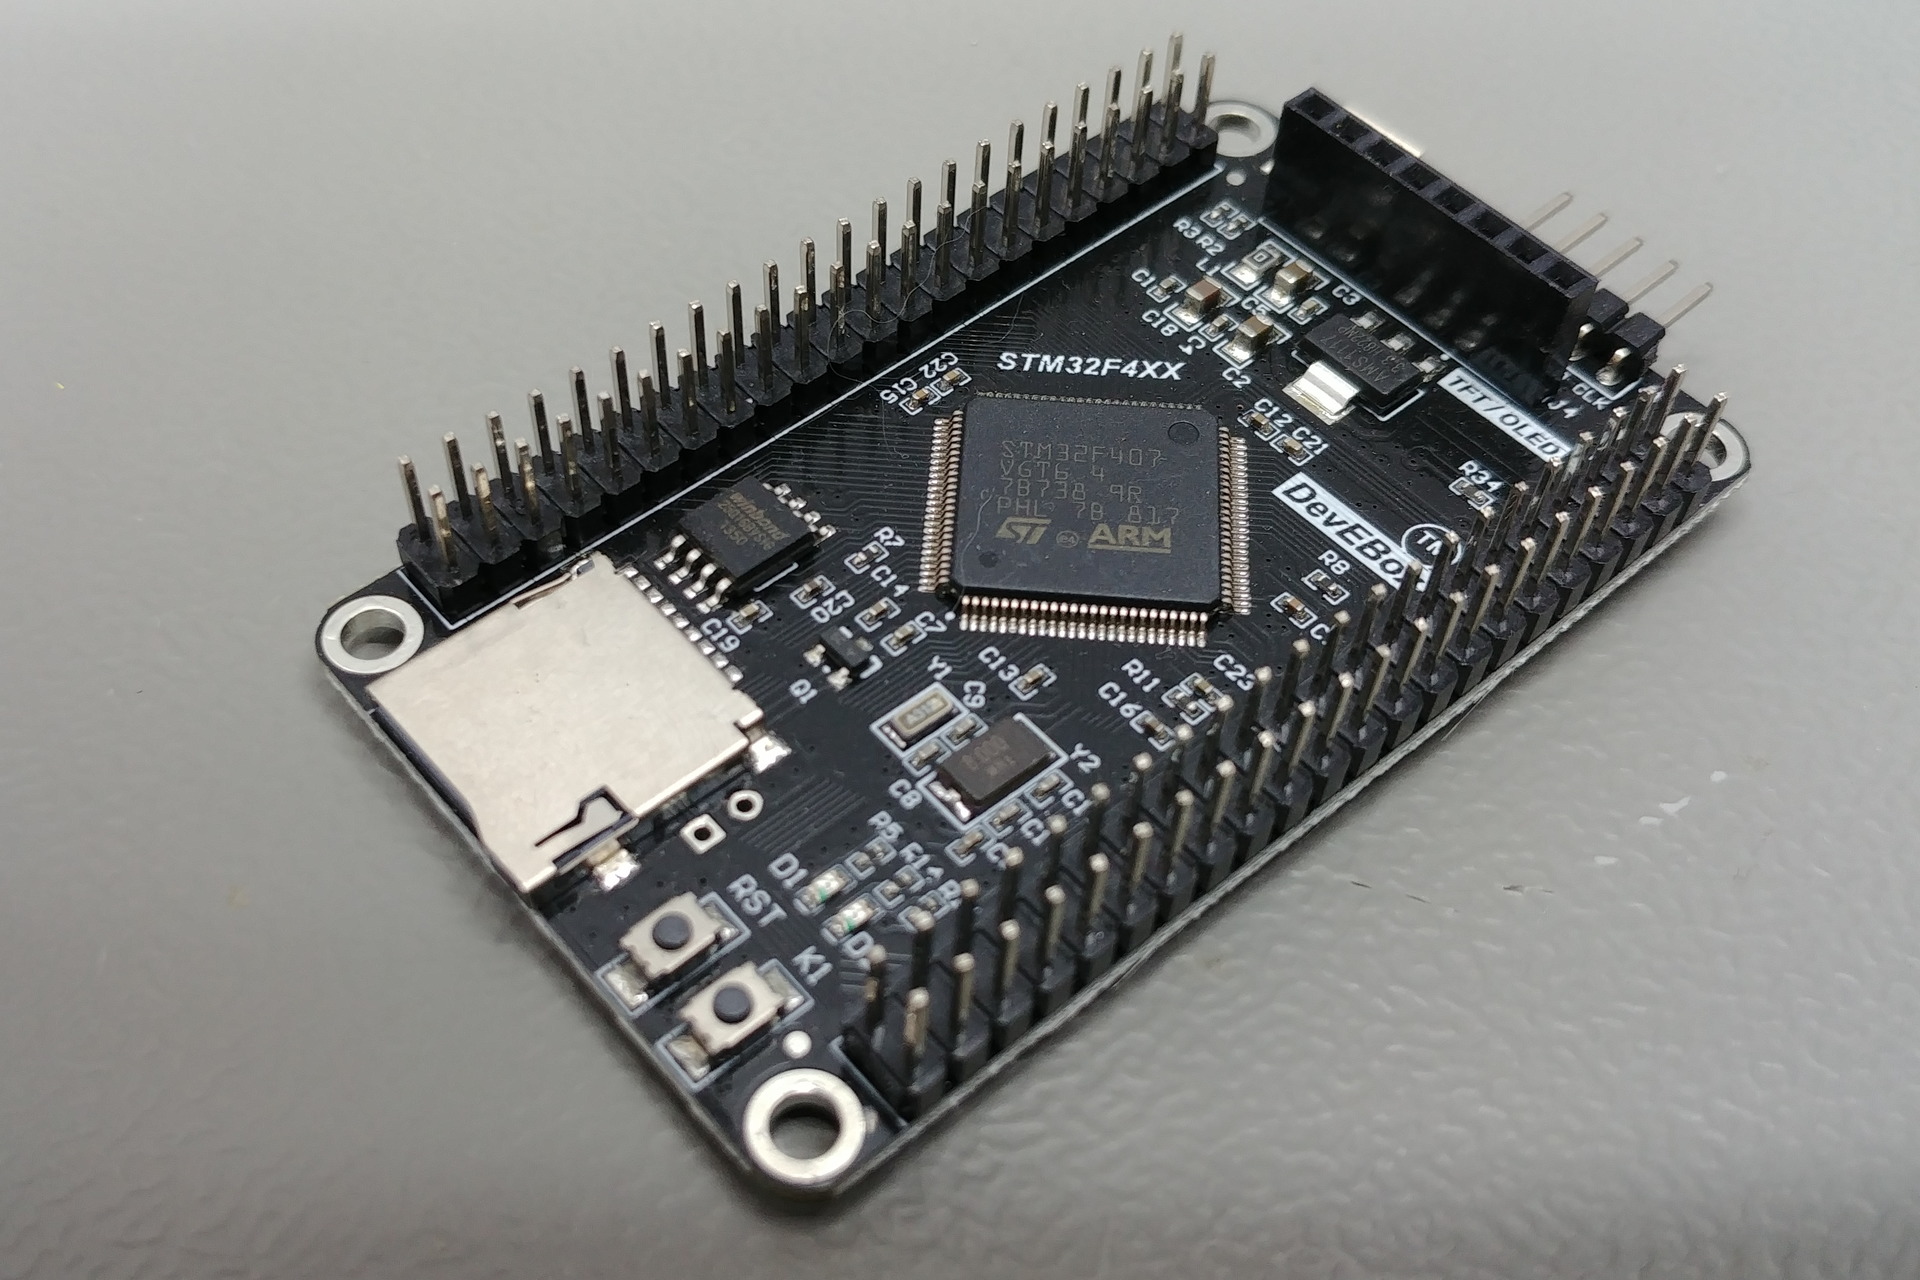 Picture of the STM32F4XX M